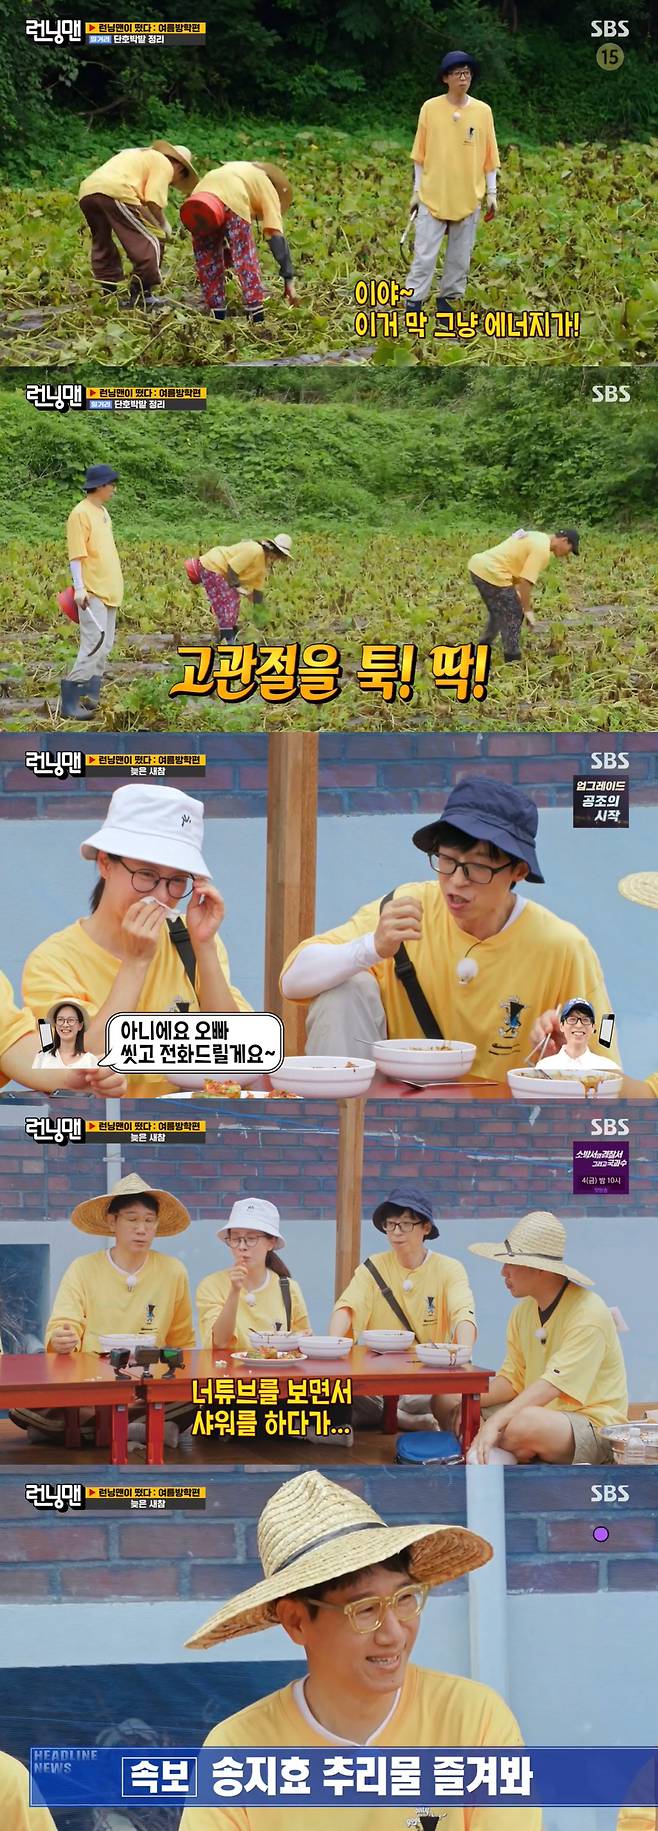 Comedian Yoo Jae-Suk showed off his chemistry with actor Song Ji-hyo.SBS Running Man broadcasted on the 30th was decorated with Running Man - Summer Vacation, and members who visited Gangwon-do grandmothers house started to help their full-time job.Ji Suk-jin saw Song Ji-hyo and Jeon So-min and was amazed that they both ran quietly on the subway.Song Ji-hyo was more eye-catching when he announced that his father was doing a passenger ship business in Tongyeong in Running Man.Song Ji-hyo and Jeon So-min reacted casually, and Haha told Ji Suk-jin, Take the subway. Its free.Yoo Jae-Suk looked at Ji Suk-jin and said, I ride this type of Taikan. Ji Suk-jin was ashamed to say, Why do you say that? Yoo Jae-Suk said, Ive been in my car for five years now.Kim Jong-kook added, Ive ridden 40,000 kilometers in 10 years.Jeon So-min shook his head and laughed when he said, If you get married, you can ride that car.Kim Jong-kook said, When I get married, I will buy a new car. My wife will give me a Rolls-Royce ride.The members were Yoo Jae-Suk, Ji Suk-jin, Kim Jong-kook, and Jeon So-min, Soft Construction with Boiled Beans (Soft Construction with Boiled Beans (Haha, Song Ji-hyo and Yang Se-chan).Haha said, I do not like muzzle fighters very much. Lets show them. This is a war!Kim Jong-kook said, I stretch my waist and hold it with my hips. I use hamstrings.Song Ji-hyo of the New Cham team started making cucumber sobakyi. Song Ji-hyo confused, Wasnt you making cucumber chili? Cucumber chili was cucumber soaked? and said, My house doesnt know because we dont make kimchi.I can not cook my mother. He also said, I can not cook cucumbers. Song Ji-hyo and Haha told each other that their mothers were worse cooks; Haha said, Ive seen you eat and spit, and Song Ji-hyo said, My mother is a person who puts peaches in miso soup.Haha nodded to Song Ji-hyo, I think I know who you look like. After a while, the field team arrived after work and ate delicious japanese noodles prepared by the new team.Yoo Jae-suk said, (Song) Ji-hyo is almost like my own brother. He almost reports to me. I called him because I couldnt call back, and he said, Im in the shower now. I said, Then you dont have to answer, and he said, No, my brother. Ill wash up and call you.The next day, he said, My brother is so good today, Im going to play golf. Ji Suk-jin told Song Ji-hyo, Do you have a cell phone when you shower?Song Ji-hyo said, I usually take a shower while watching YouTube. I tend to watch the rhetoric. 